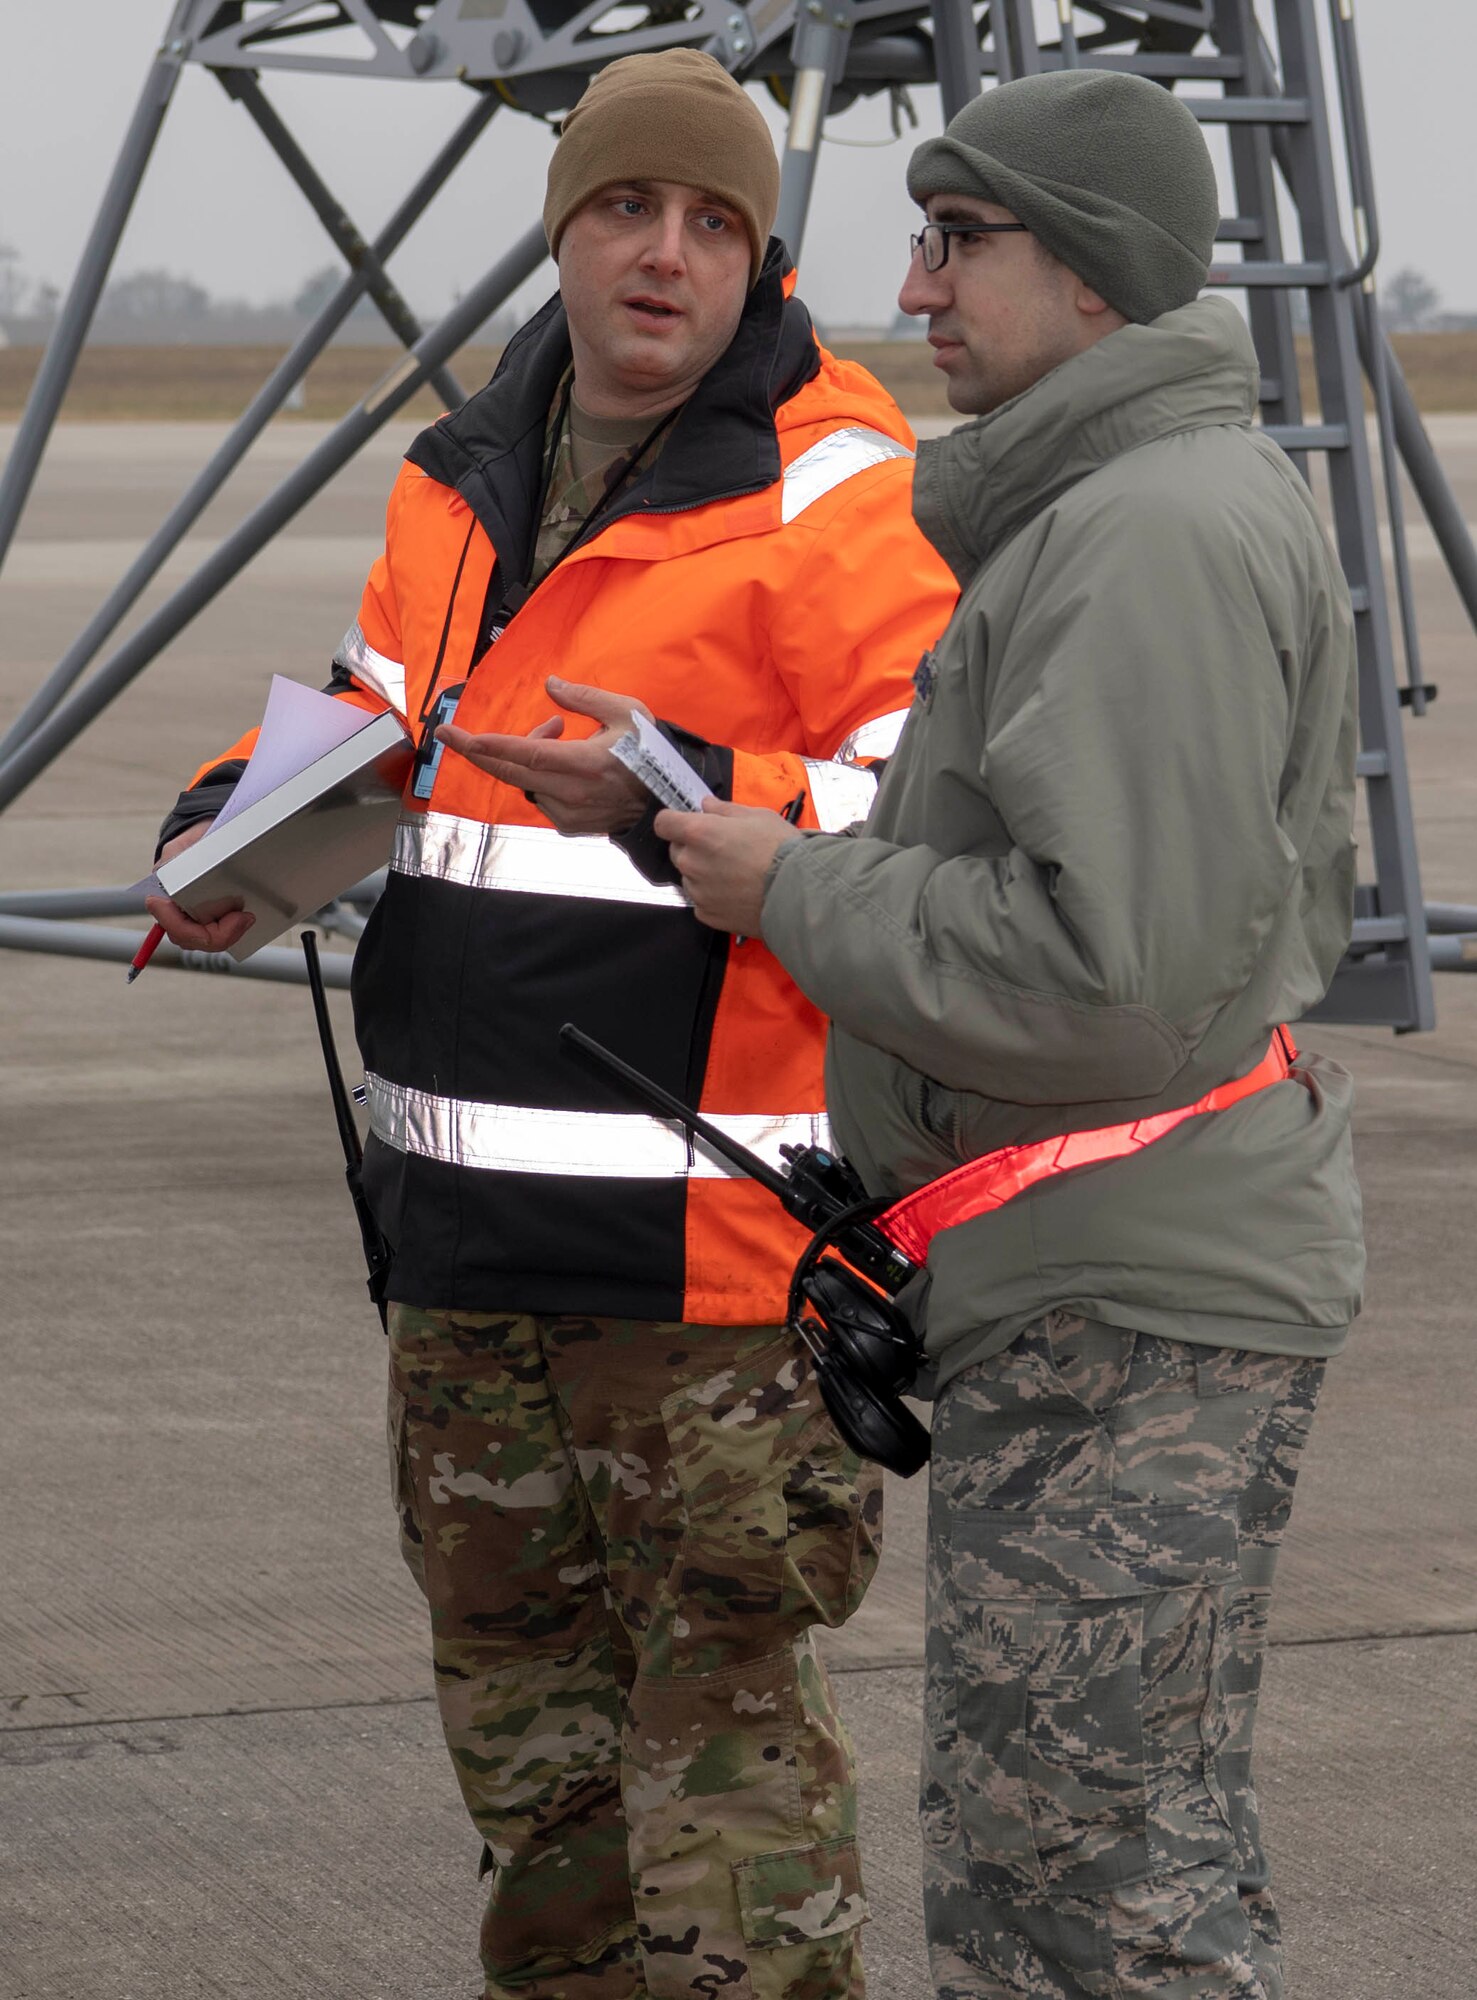 U.S. Air Force Tech. Sgt. Loren Martin, 726th Air Mobility Squadron flight line expediter, left, and Tech. Sgt. Chad Kearney, 726th AMS quality assurance inspector, right, ensure members of the 726th AMS correctly perform rescue procedures during a fall protection exercise at Spangdahlem Air Base, Germany, Jan. 23, 2020. The annual exercise is intended to help Airmen be better prepared to rescue their wingman if someone falls off an aircraft wing during an aircraft inspection. (U.S. Air Force photo by Senior Airman Kyle Cope)